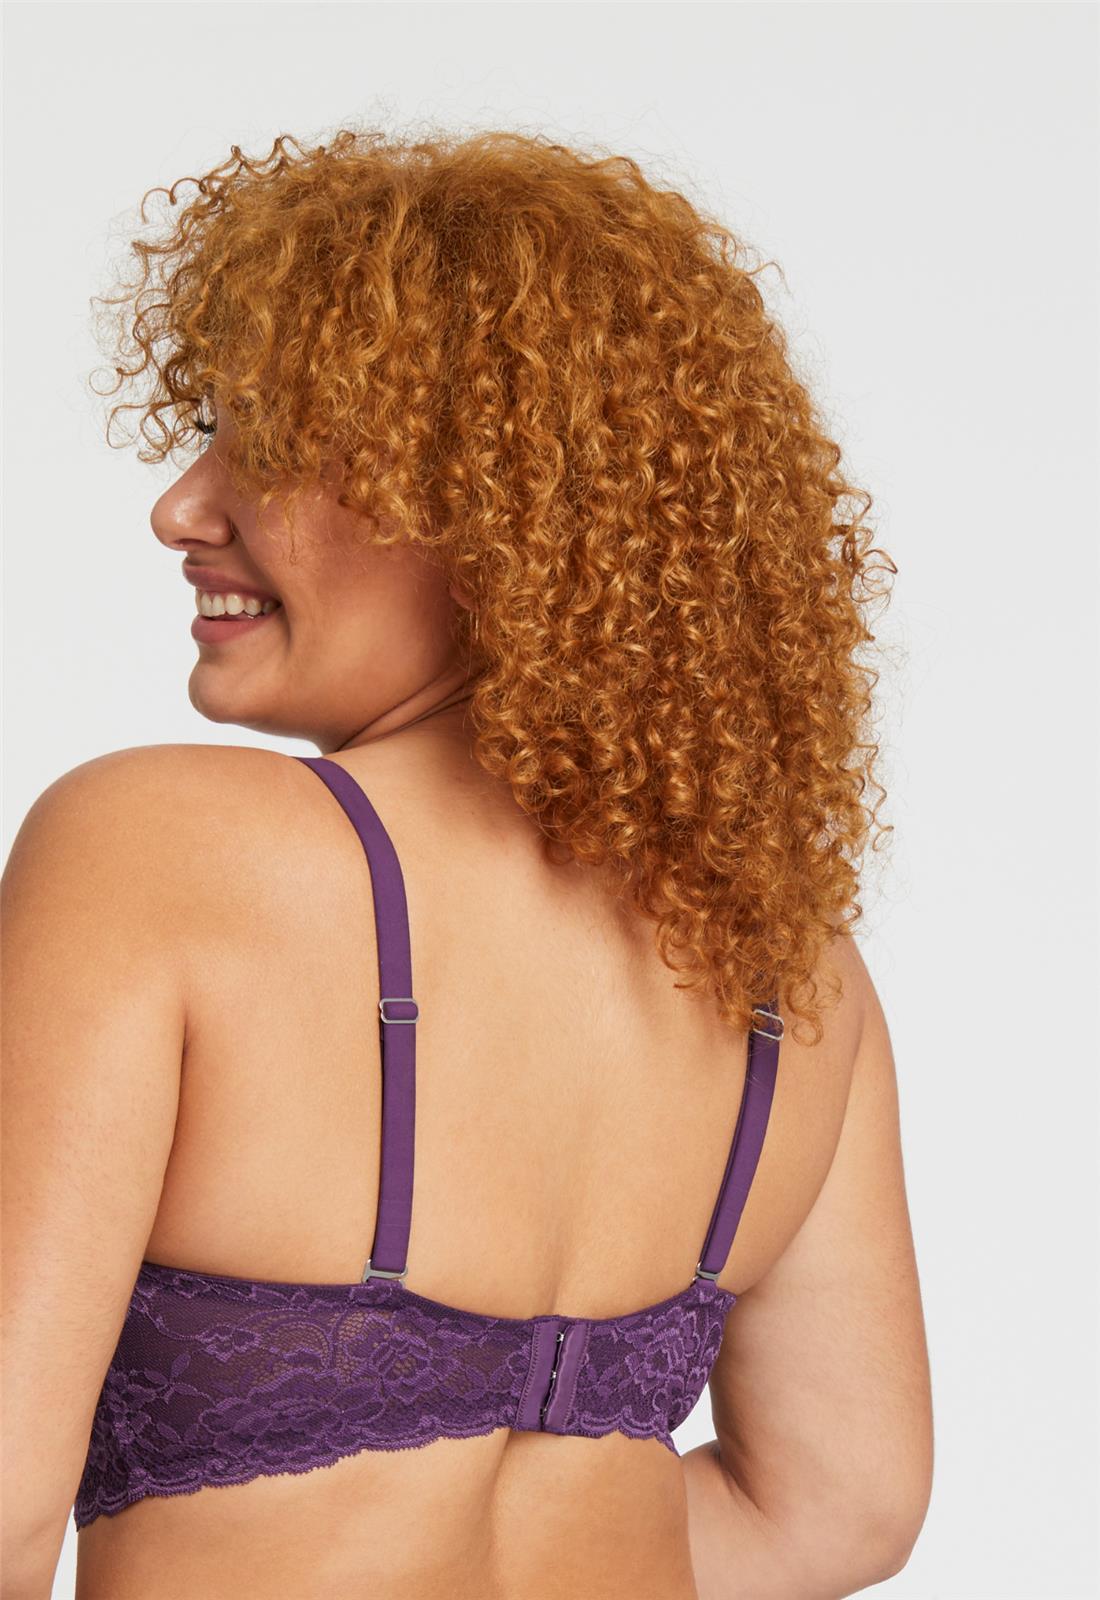 Cup-Sized Lace Bralette - Pinot worn by model back view